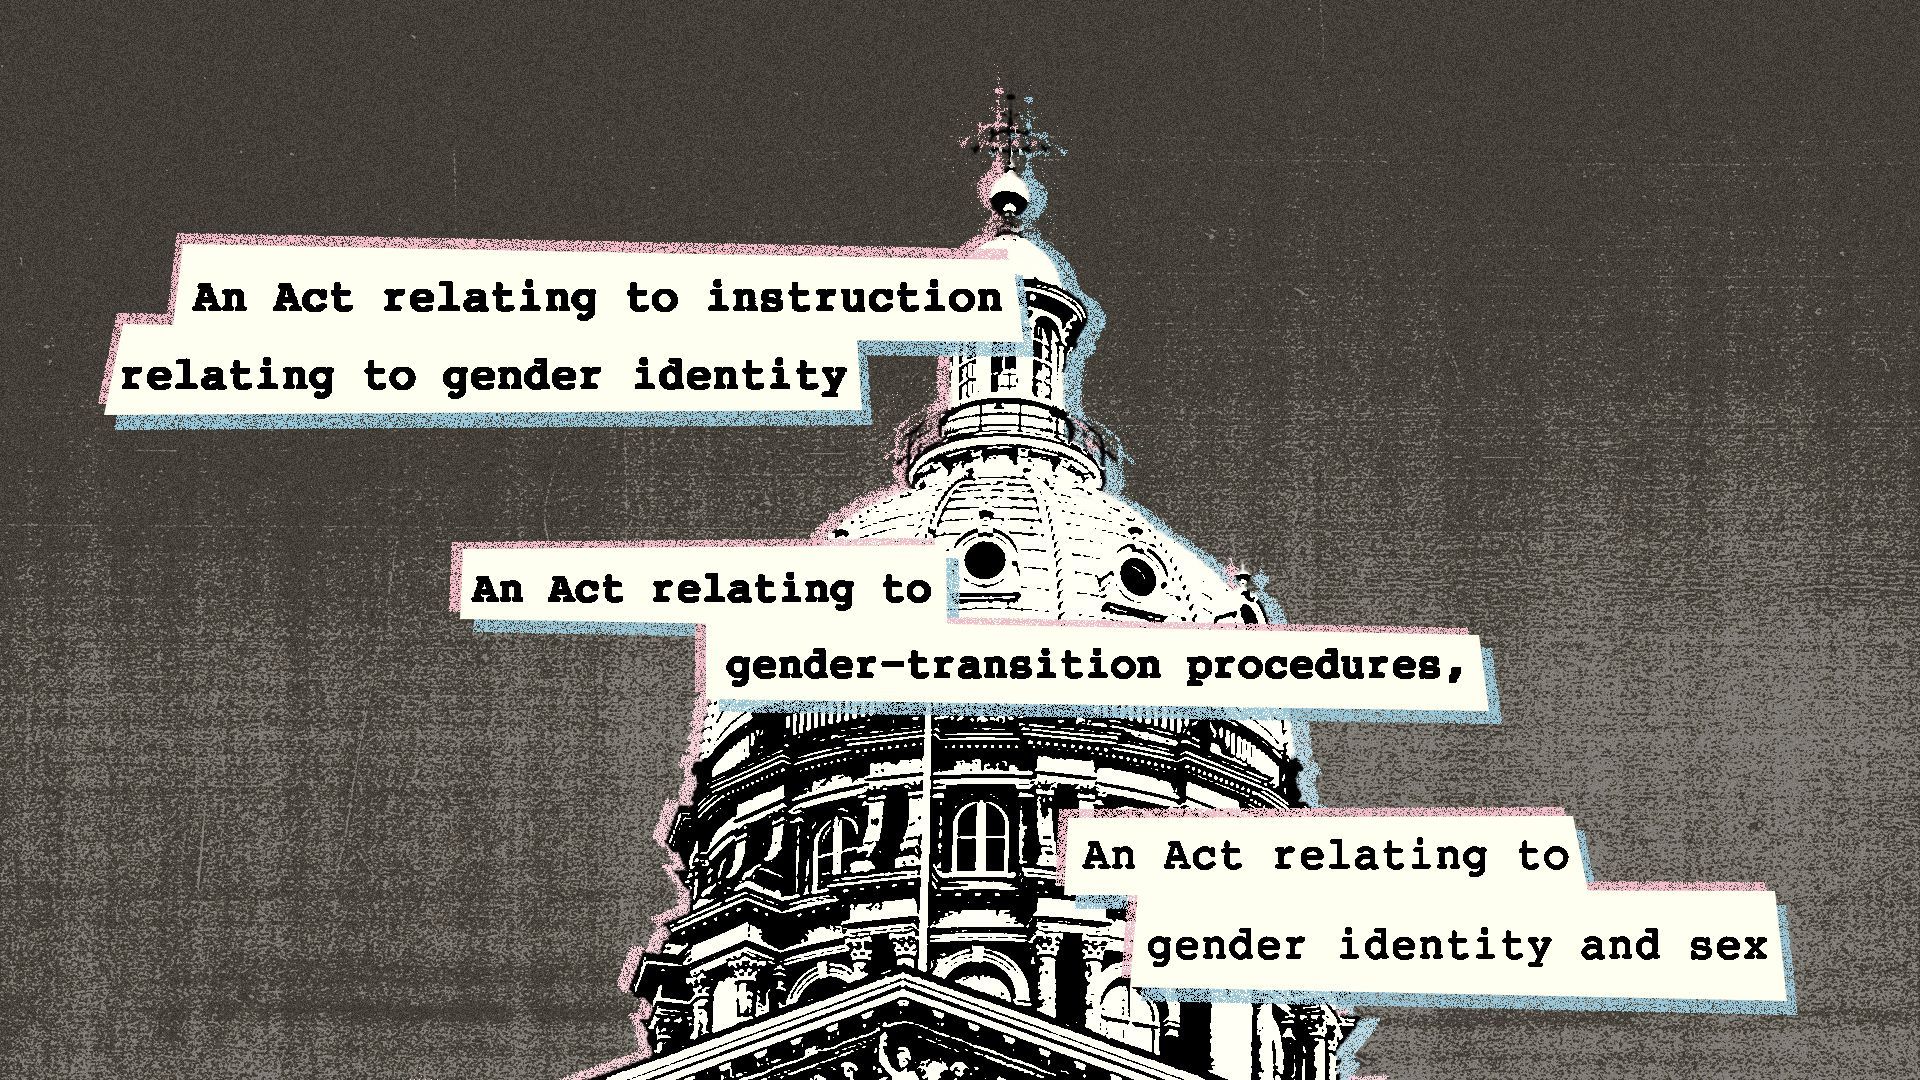 IIllustration of a collage featuring the Iowa State Capitol building and snippets of anti-trans bills.